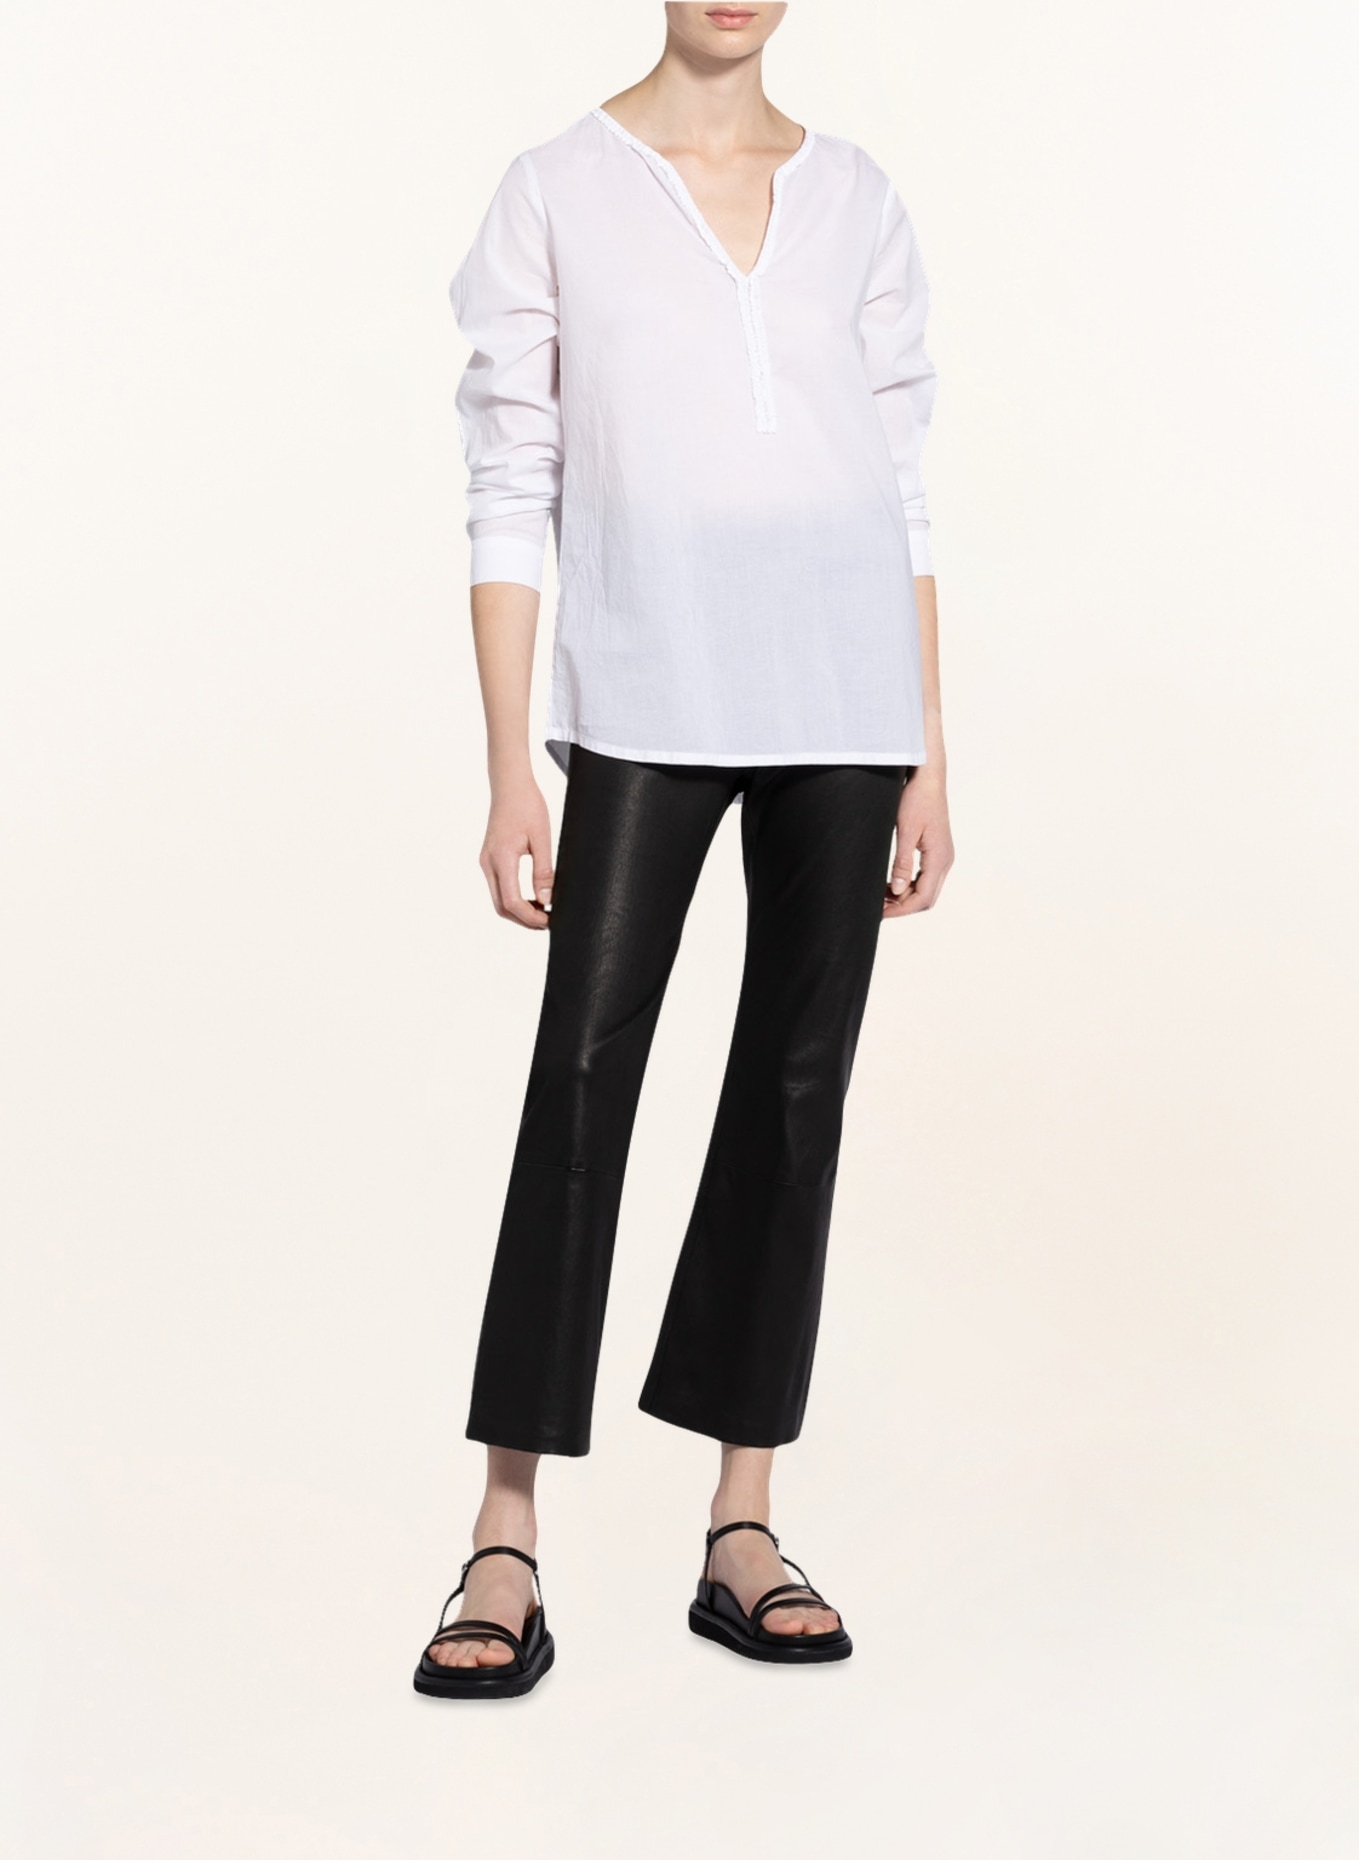 LIEBLINGSSTÜCK Blouse-style shirt ROSEMARIE with ruffle trim, Color: WHITE (Image 2)